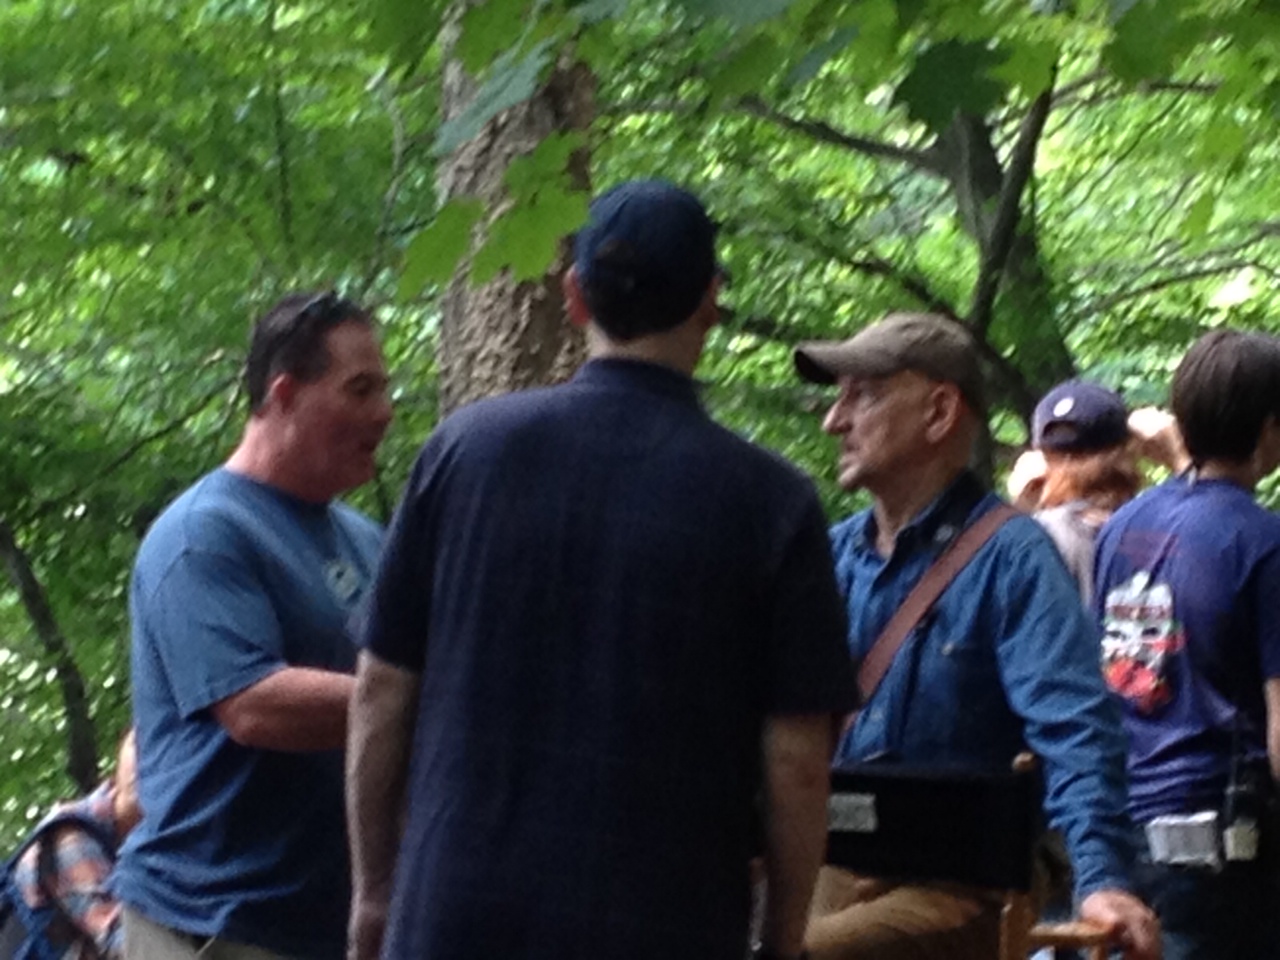 Michael W Gray, Exec Producer (L) with Sir Ben Kingsley (R) on the set of A BIRDERS GUIDE TO EVERYTHING